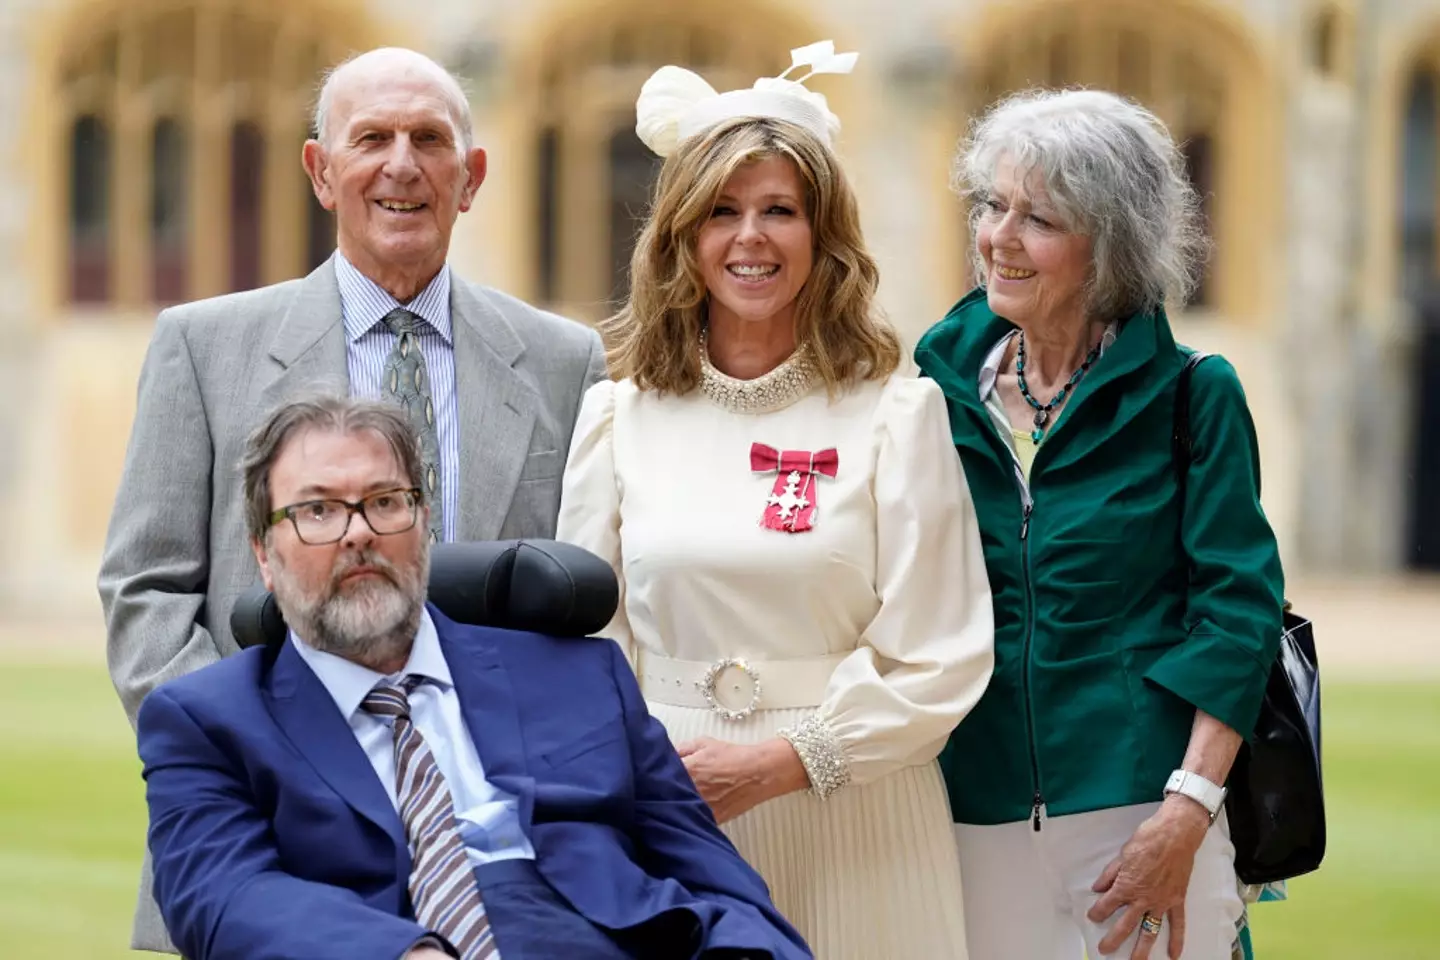 Kate pictured with husband Derek and her parents Gordon and Marilyn Garraway.